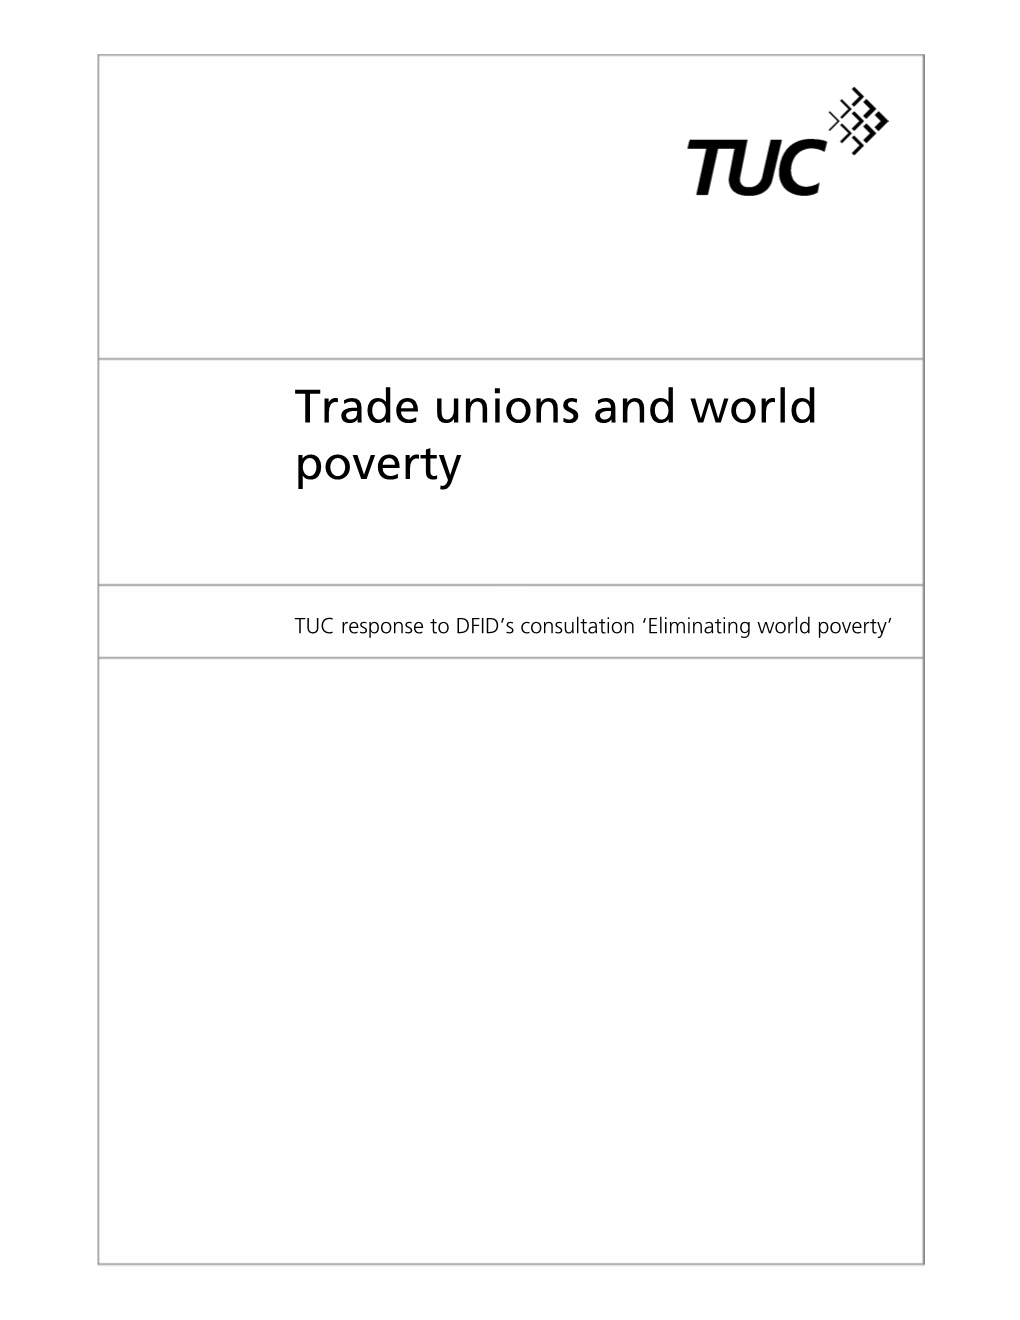 Trade Unions and World Poverty